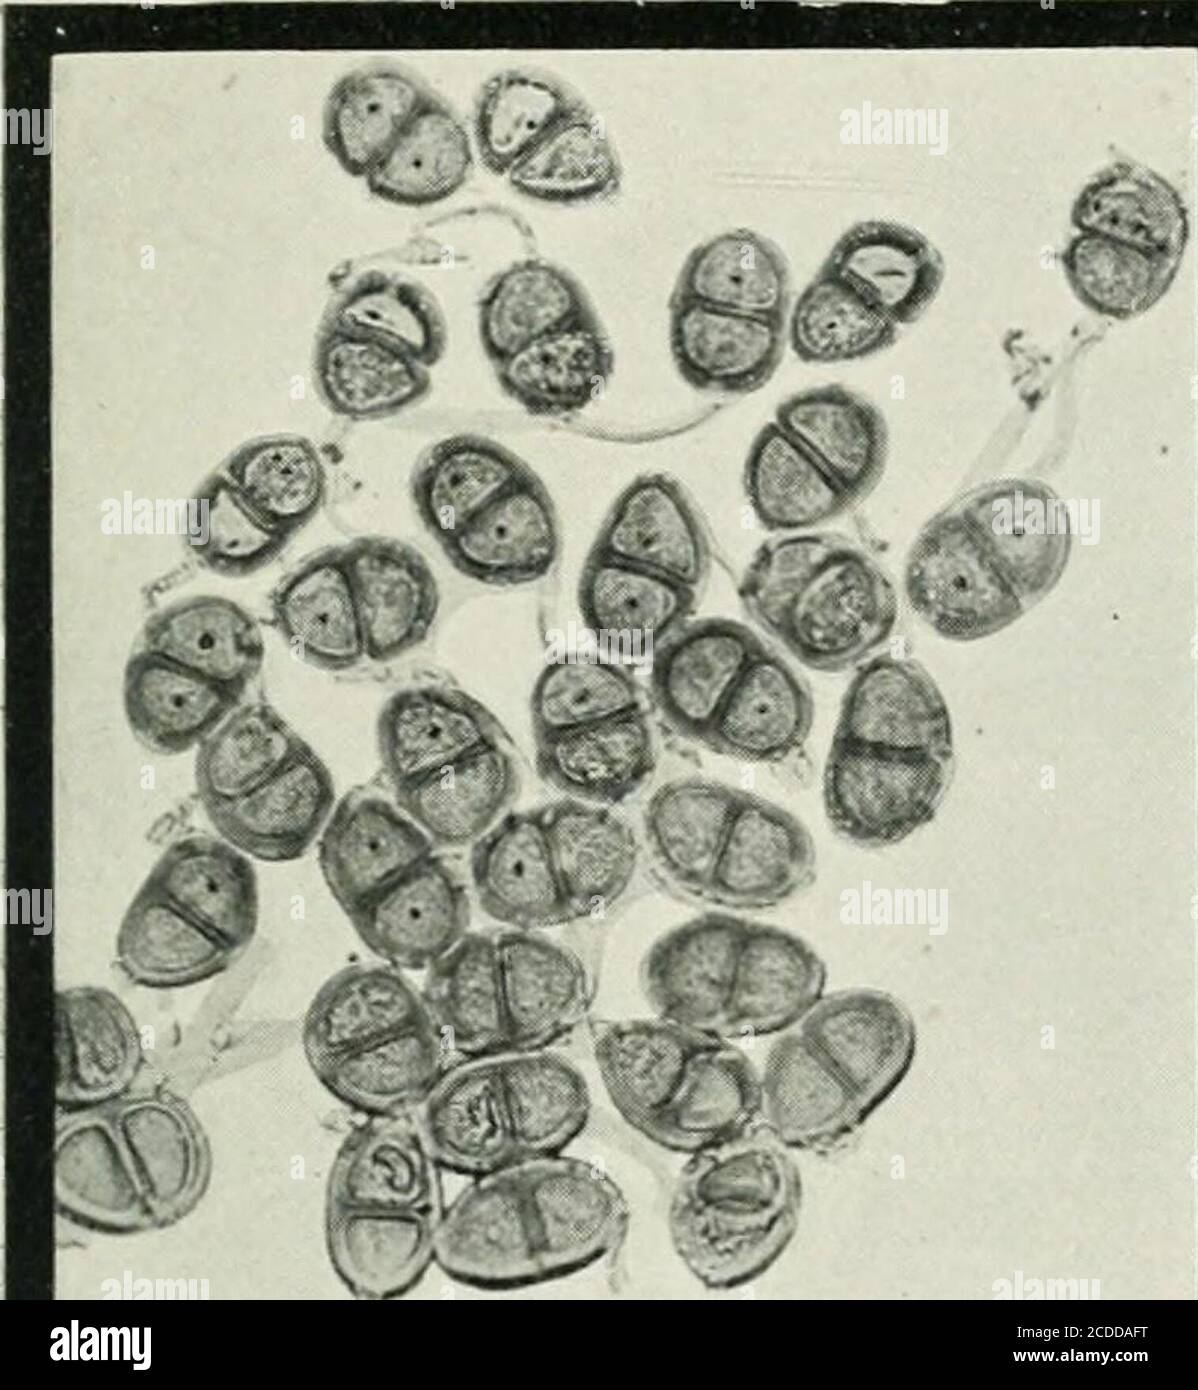 . The rusts of Australia, their structure, nature, and classification . % G. U. Robinson, Phot. x 250. PUCCINIA. LILIACEAE, HAEMODORACEAE, AMARYLLIDEAE, and ACANTHACEAE. 2^2 Explanation of Plates. PLATE VI. (All Figures X 250.) PUCCINIA.Fig. 45. .roup of teleutospores of Puccinia carissae on Carina ovata. 46. Section of teleutosorus of P. alyxiae on Alyxia buxijolia, with telcutospores .irnl mesospores. 47. Telcutospores of P. gilgiana on Leschcnaultia linarioides. 48. 49. Telcutospores and mesospores of P. saccardoi on Goodenia geniculate 50. Teleutospores and mesospores of P. brunoniae on Br Stock Photo